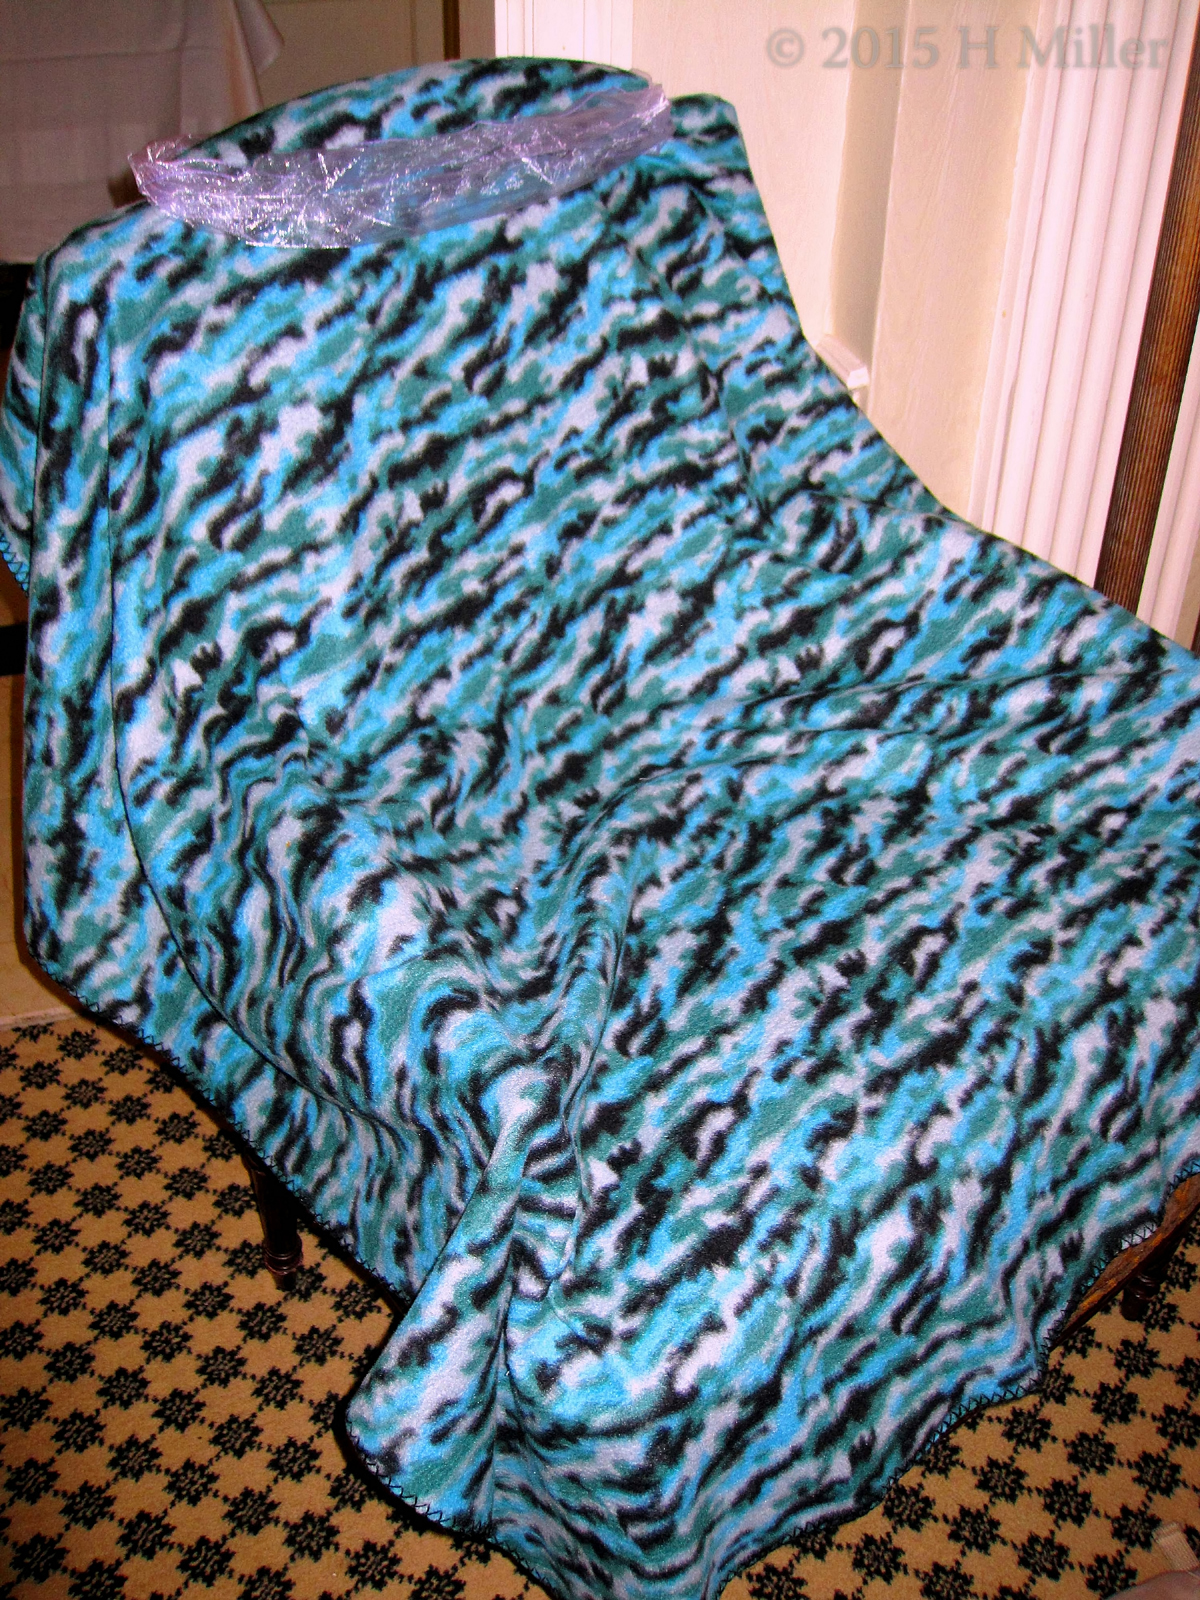 Cool Patterns! Thrpws Cover The Elegant Hotel Furniture. 4